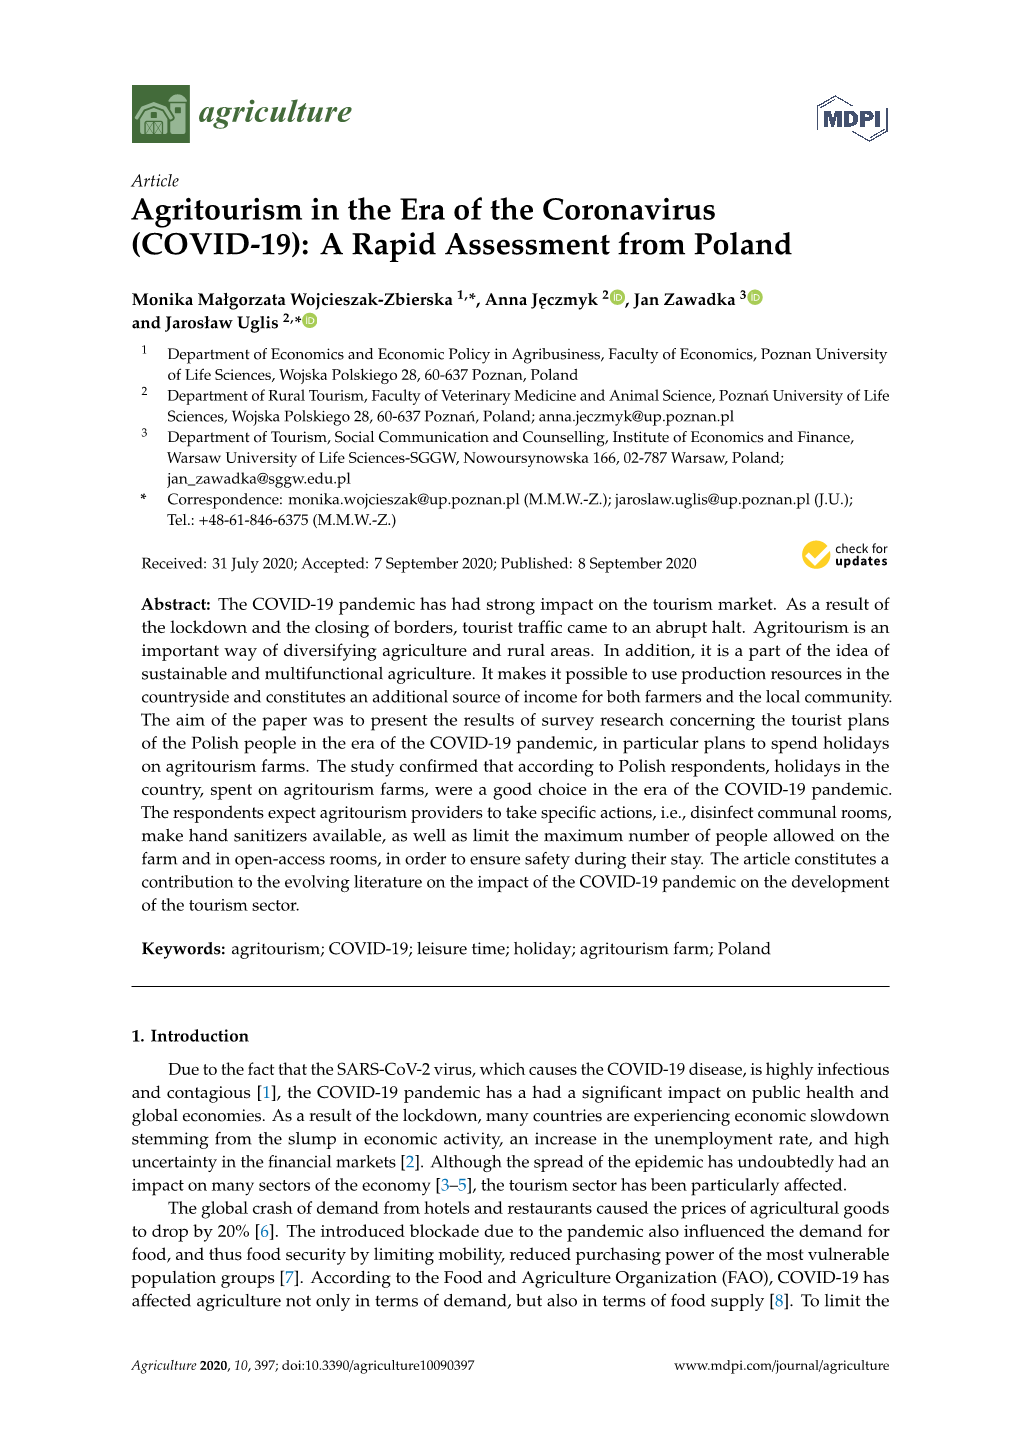 Agritourism in the Era of the Coronavirus (COVID-19): a Rapid Assessment from Poland